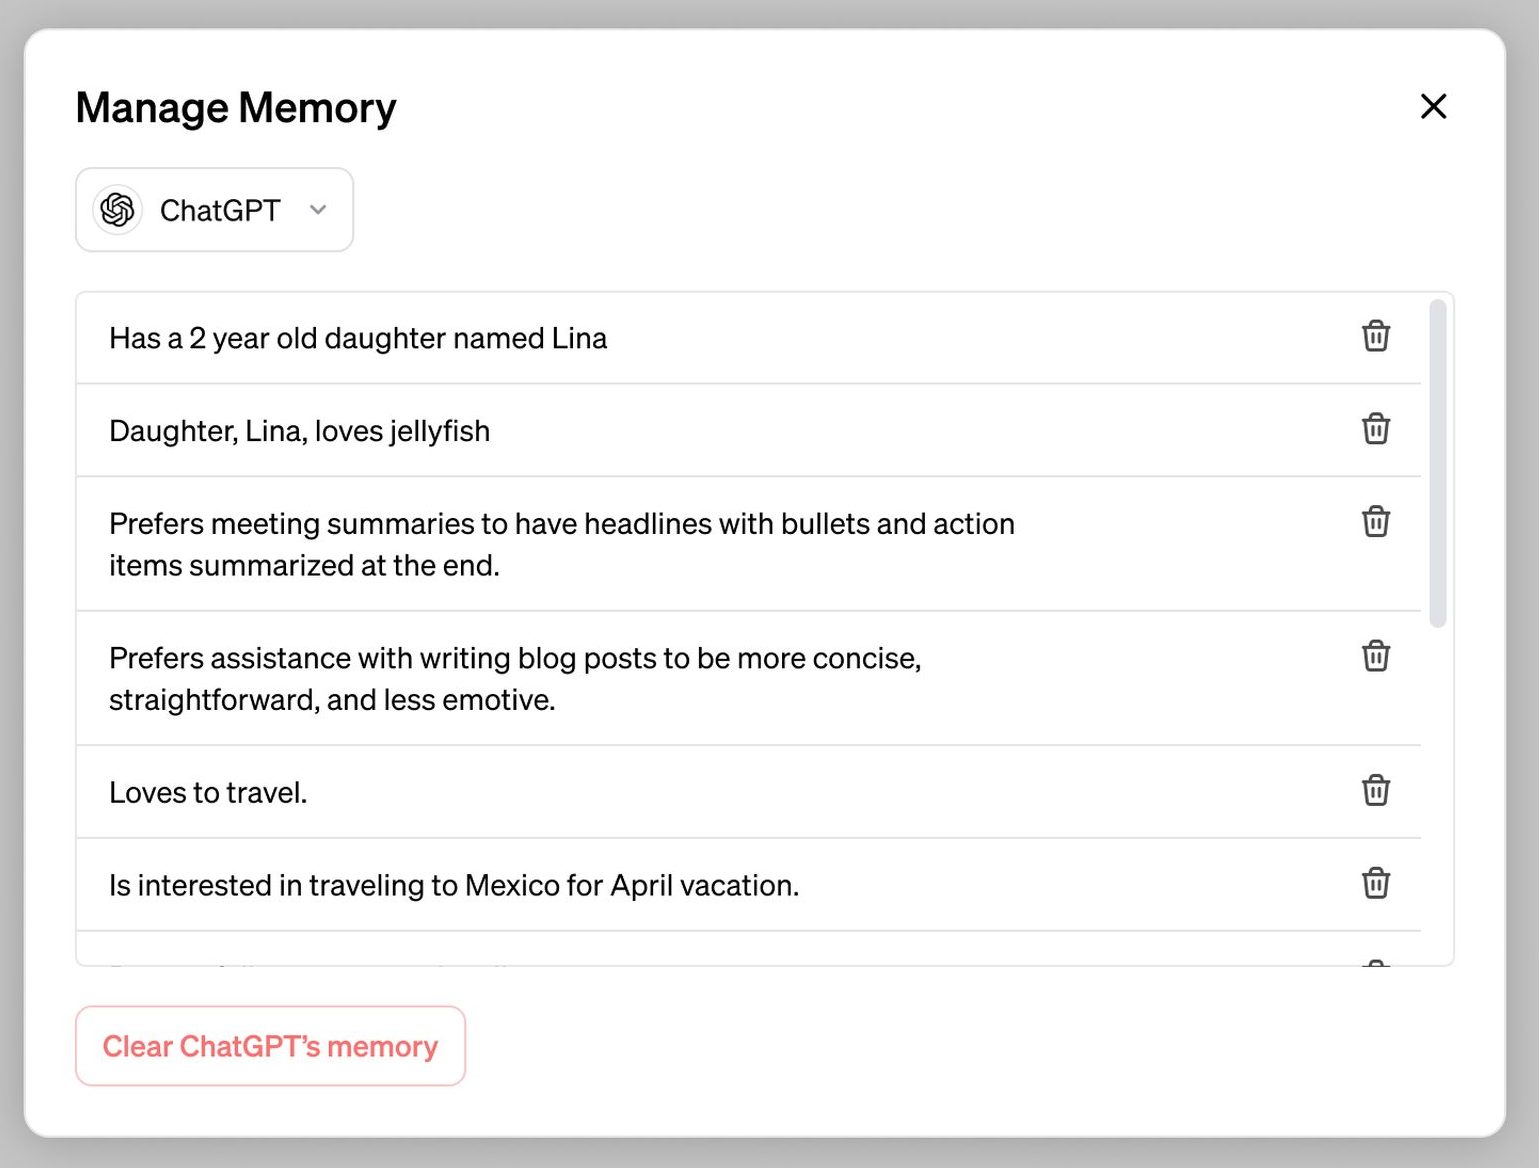 What is ChatGPT memory?